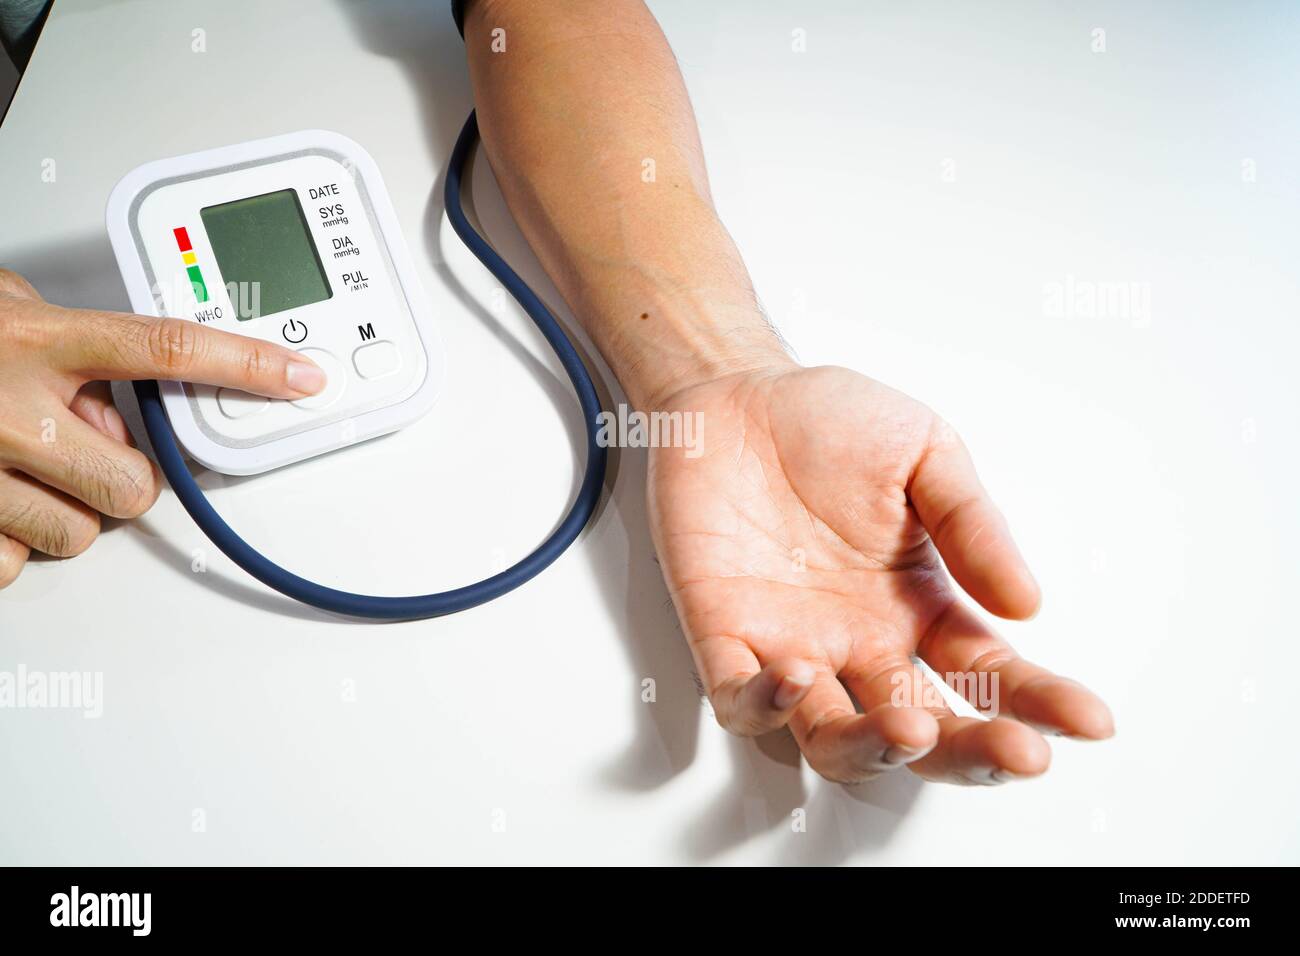 Blood pressure check test monitor exam. Male hand and diagnostic